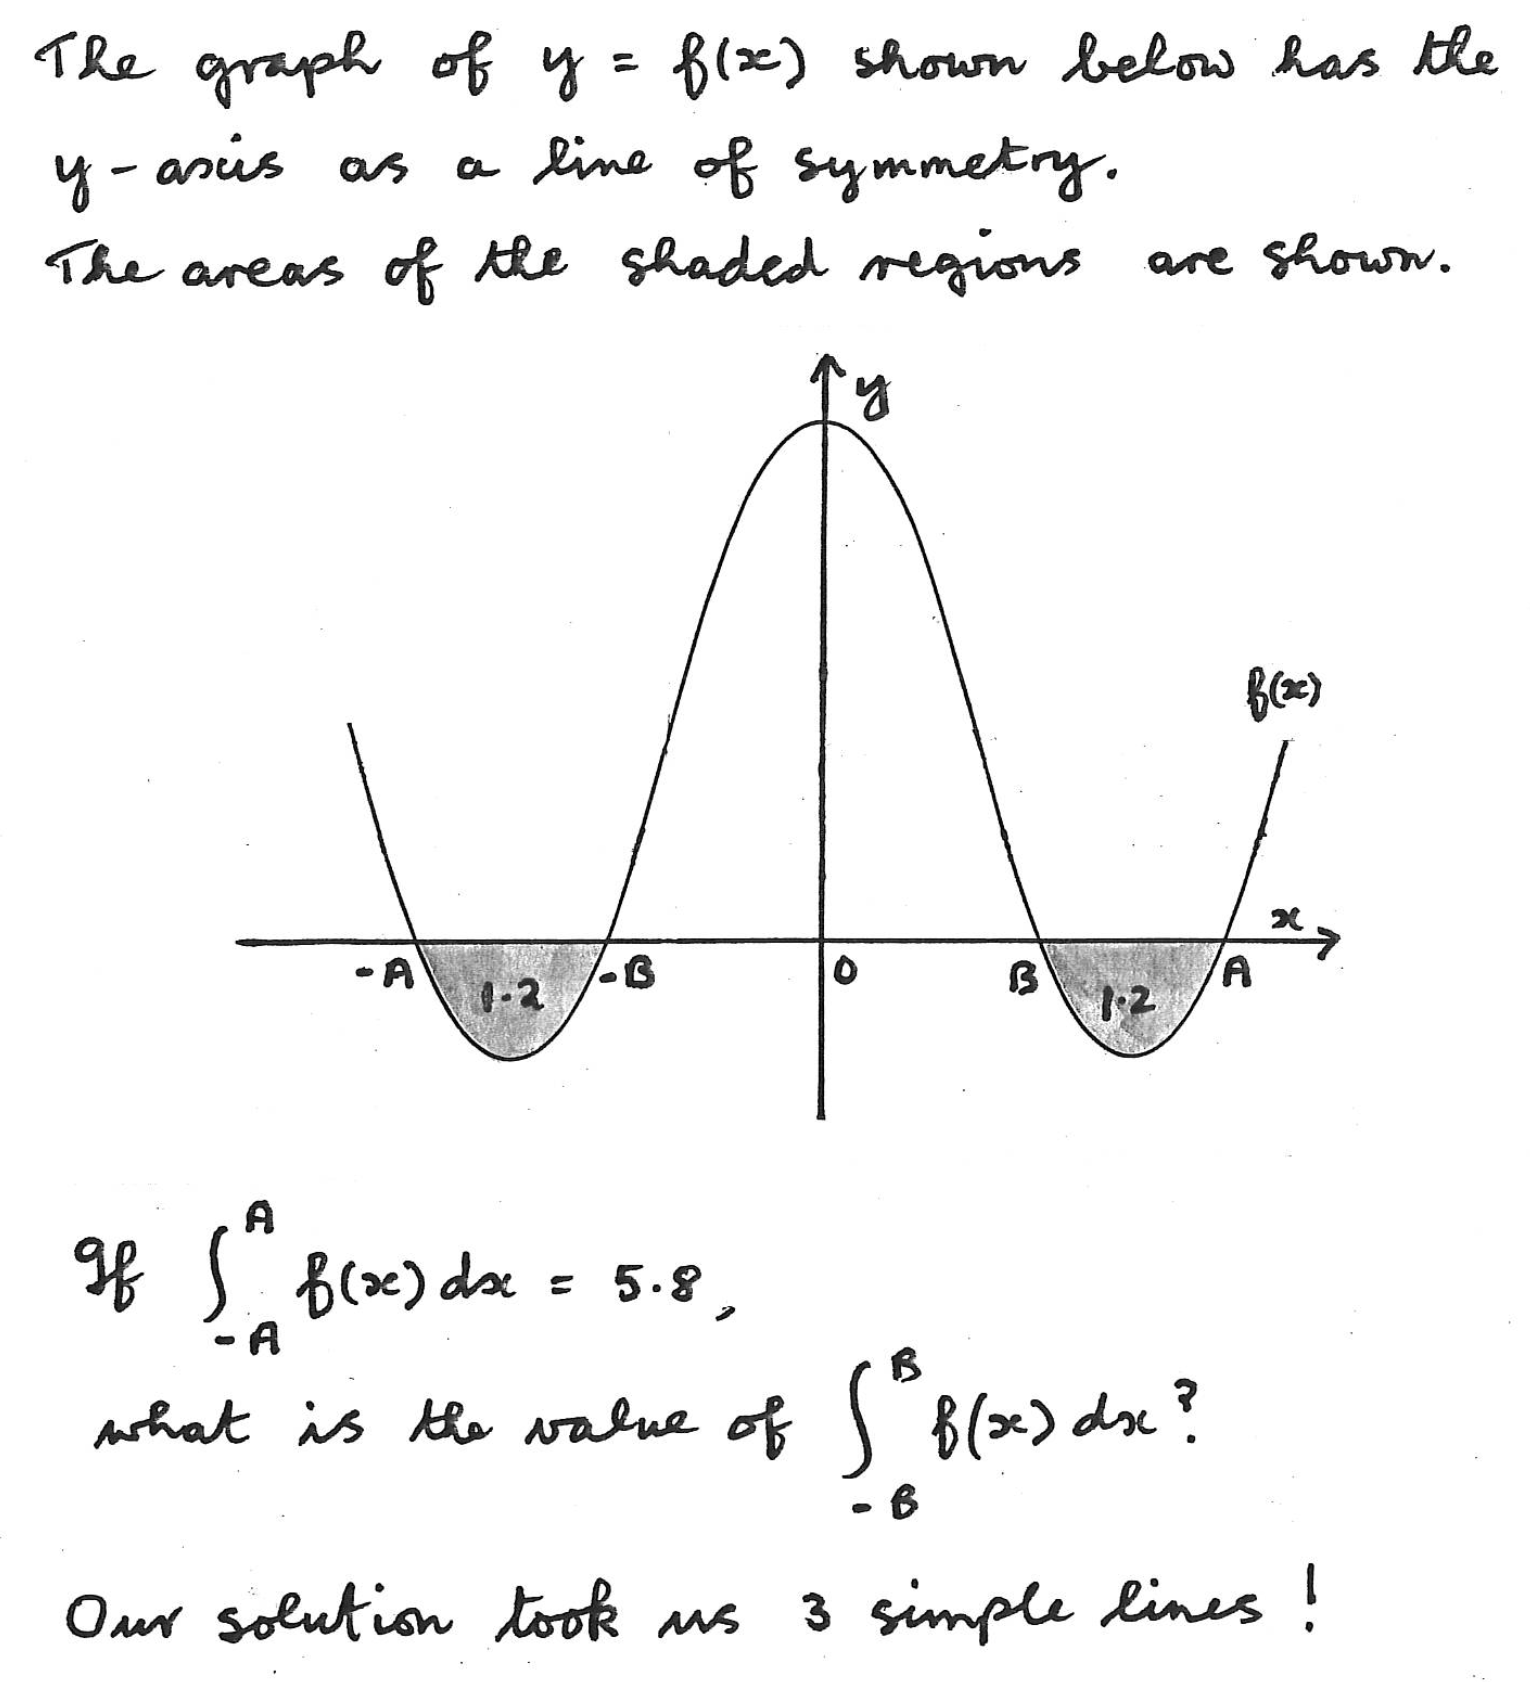 Handwritten maths question, including a question and a graph. The question is on integration.